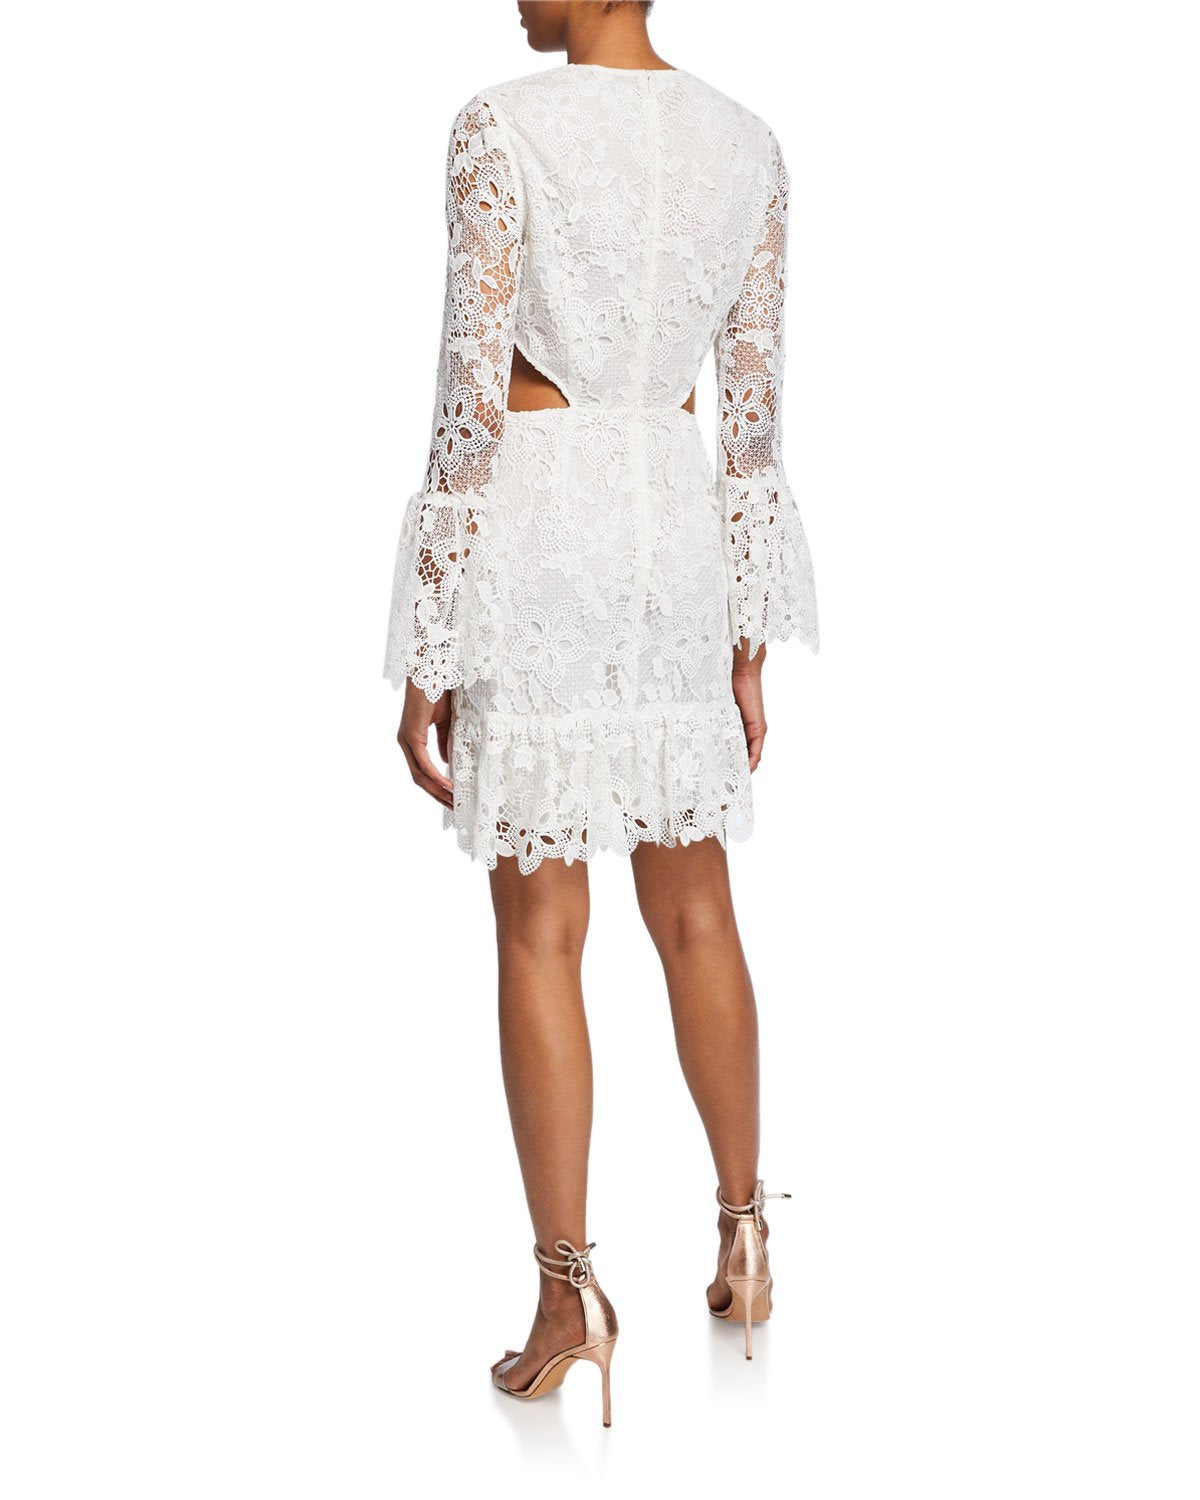 Isabel Floral Lace Long-Sleeve Cocktail Dress - 